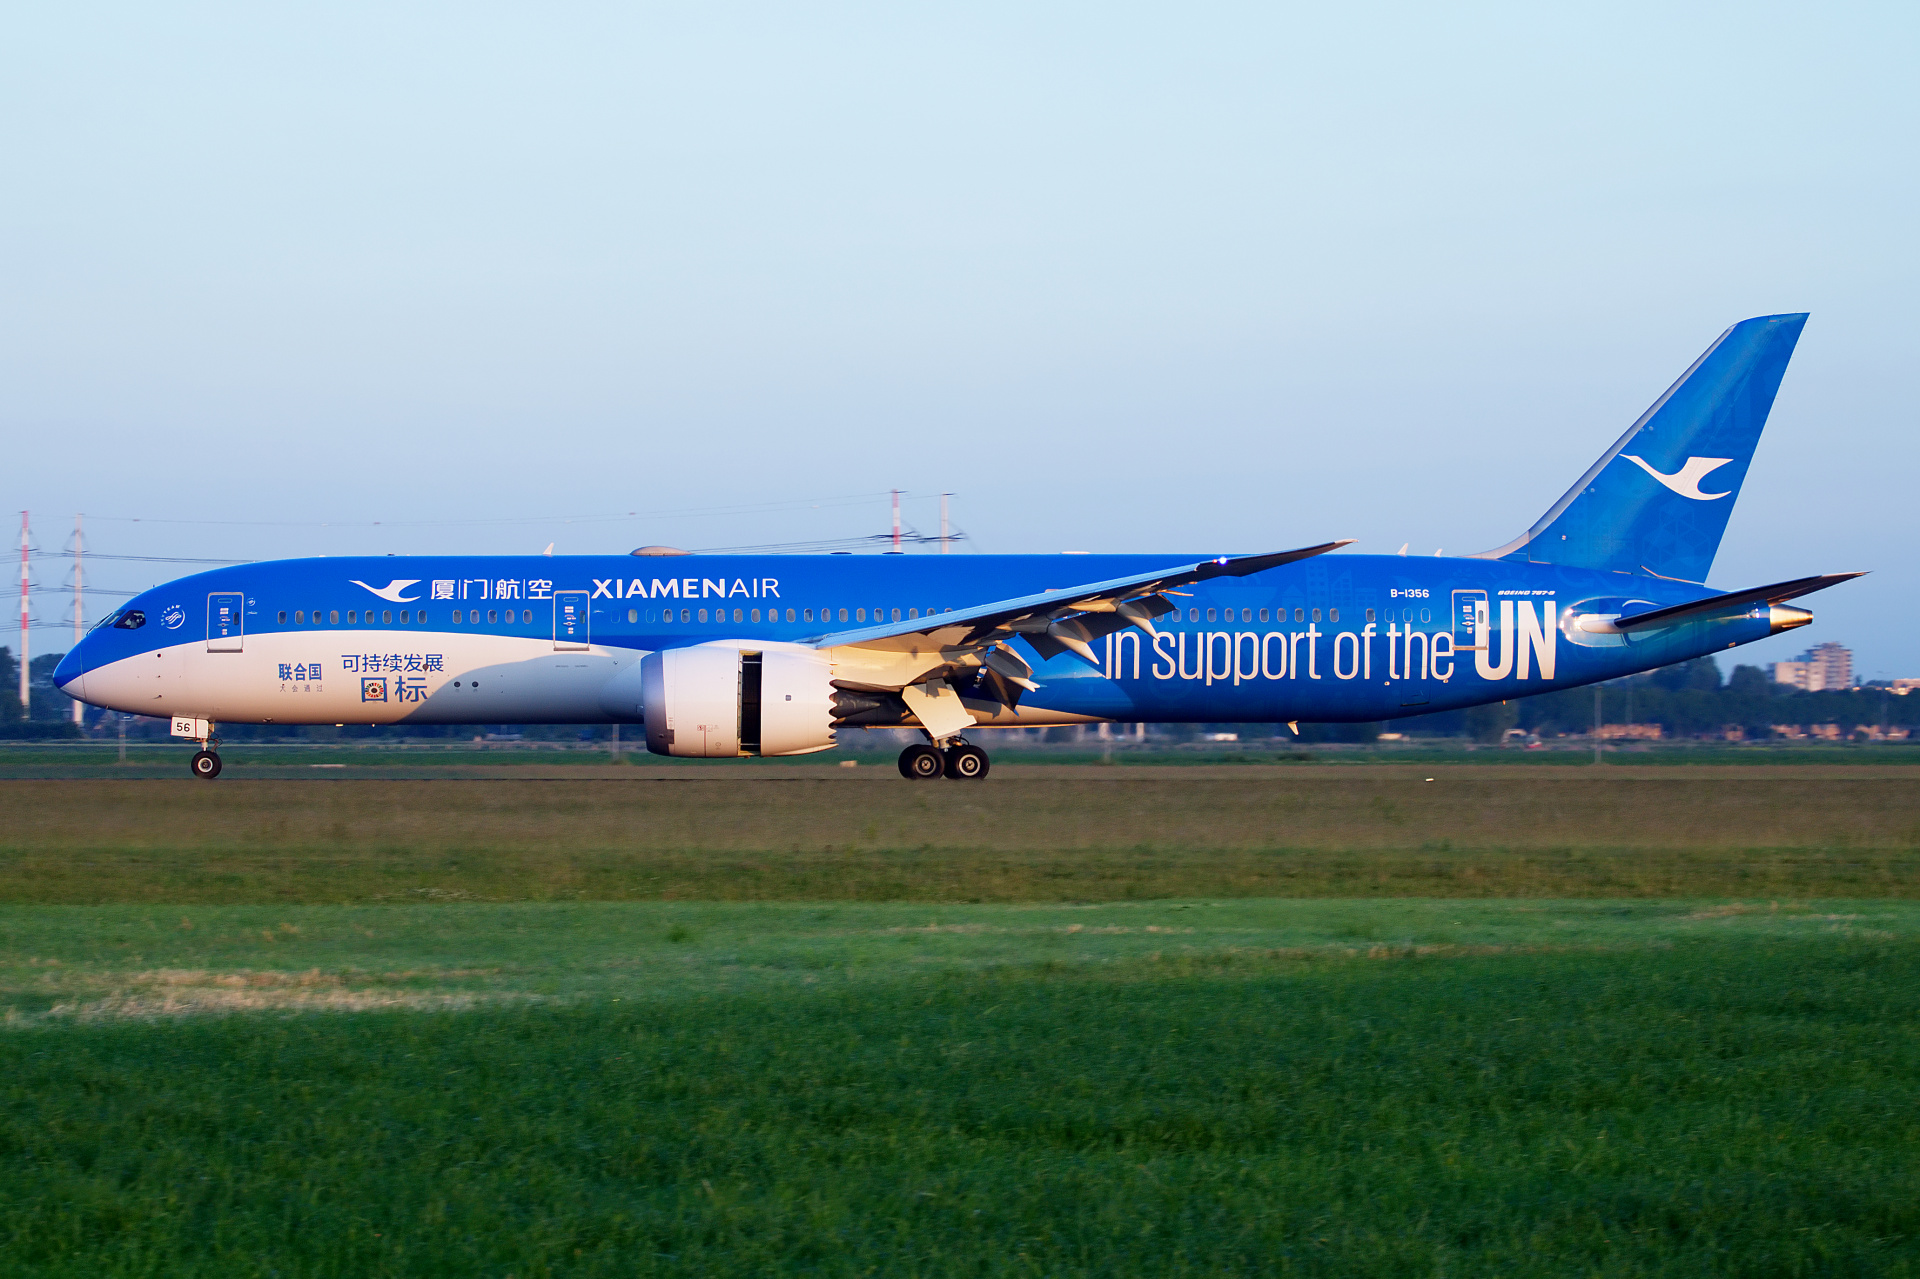 B-1356, XiamenAir (In Support of the UN livery) (Aircraft » Schiphol Spotting » Boeing 787-9 Dreamliner)